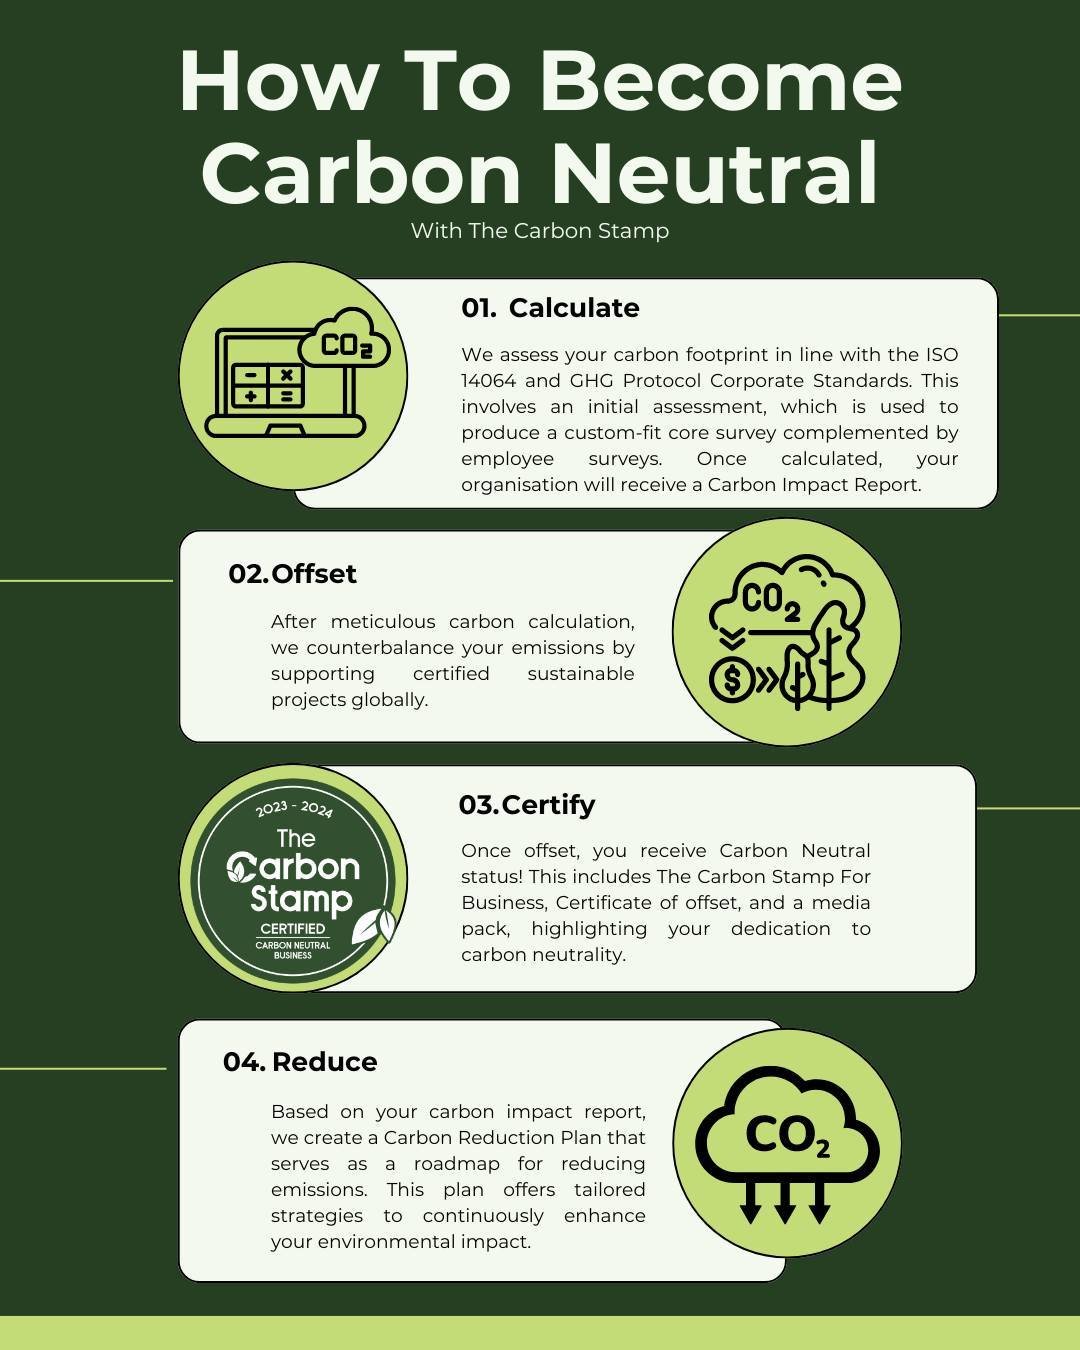 Our focus at The Carbon Stamp is to help guide businesses in calculating, reporting, and reducing their carbon footprint. 

We are committed to simplifying sustainability and making it accessible to businesses all industries and sizes, empowering you